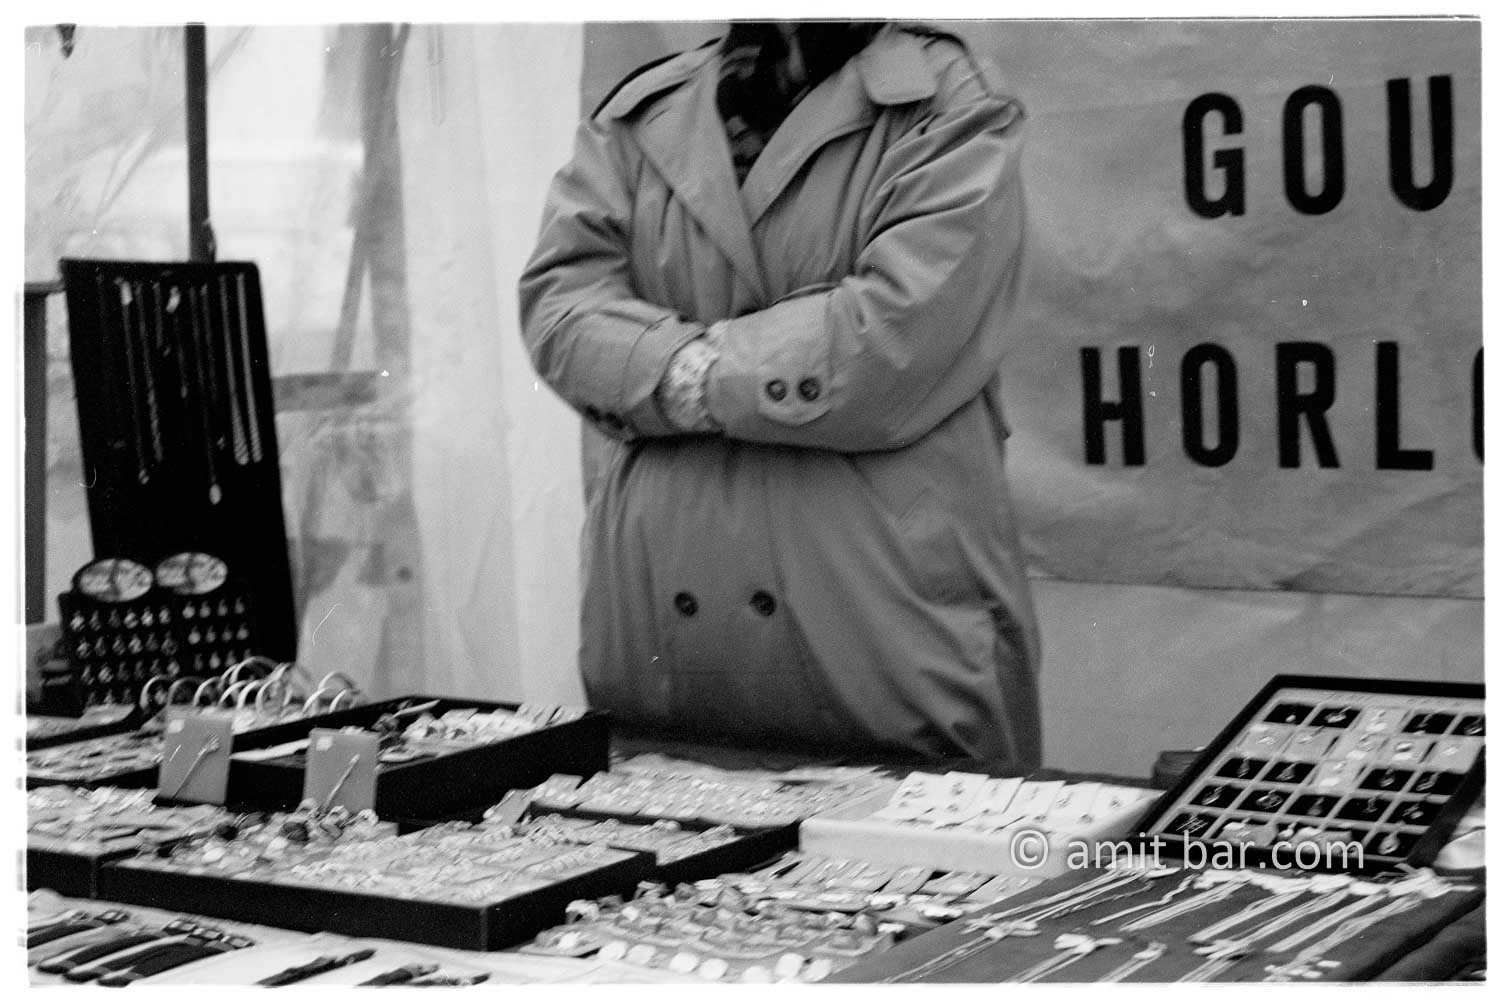 Golden hands: A open market seller of golden watches in Doetinchem is hiding his hands in his sleeves on a cold day